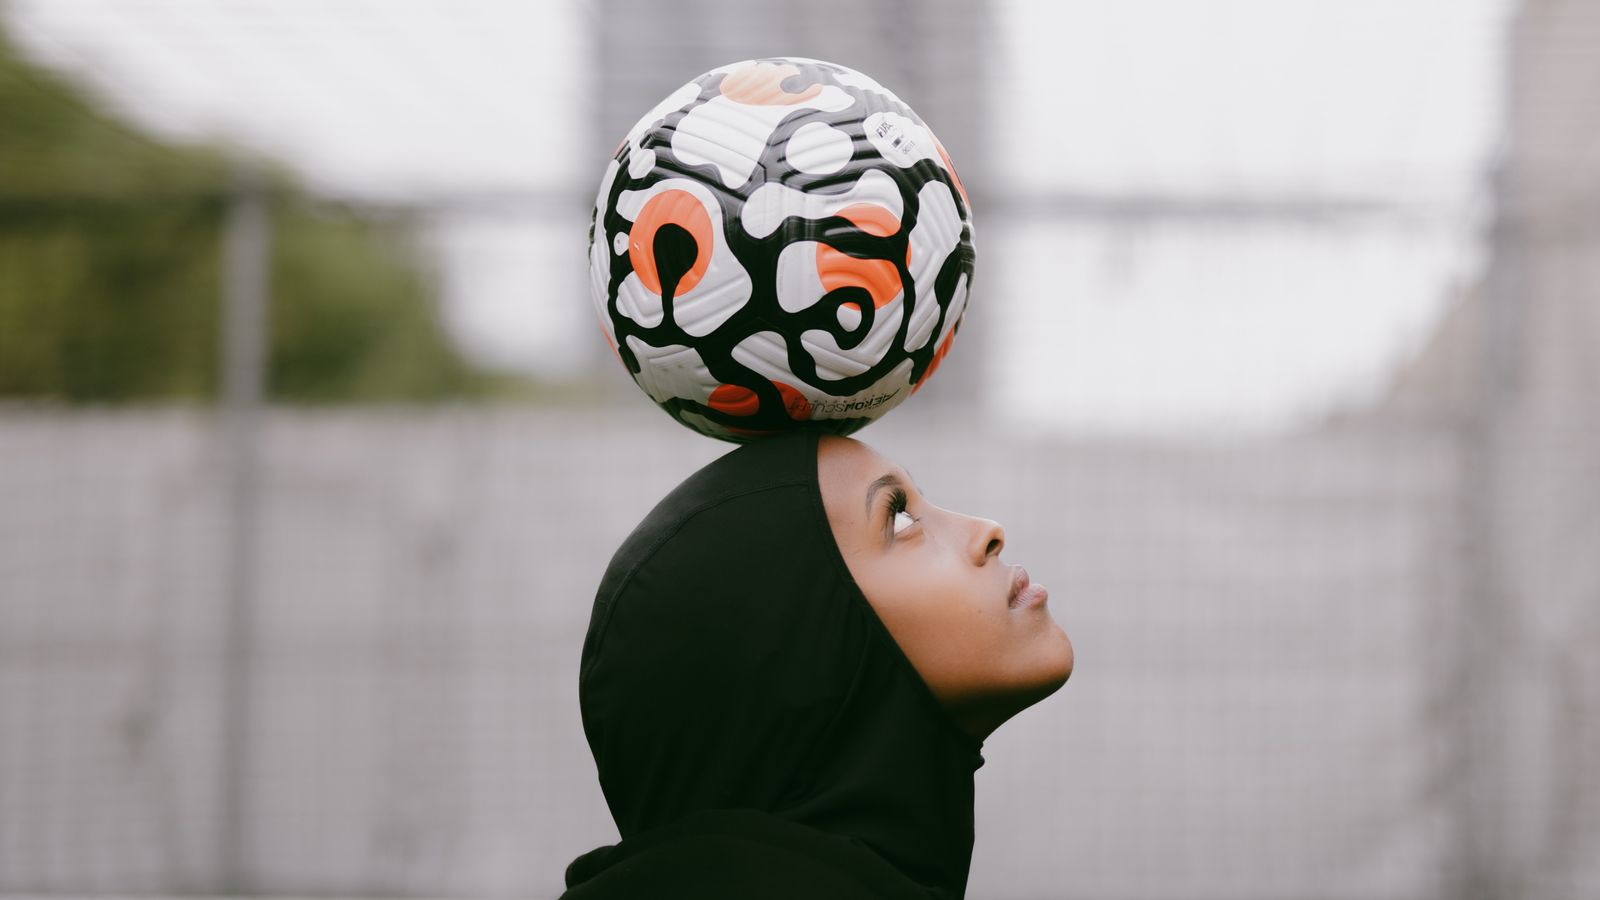 Iqra Ismail exceptional interview: Somali Muslim coach conquering racism to inspire ladies to engage in football | Soccer Information